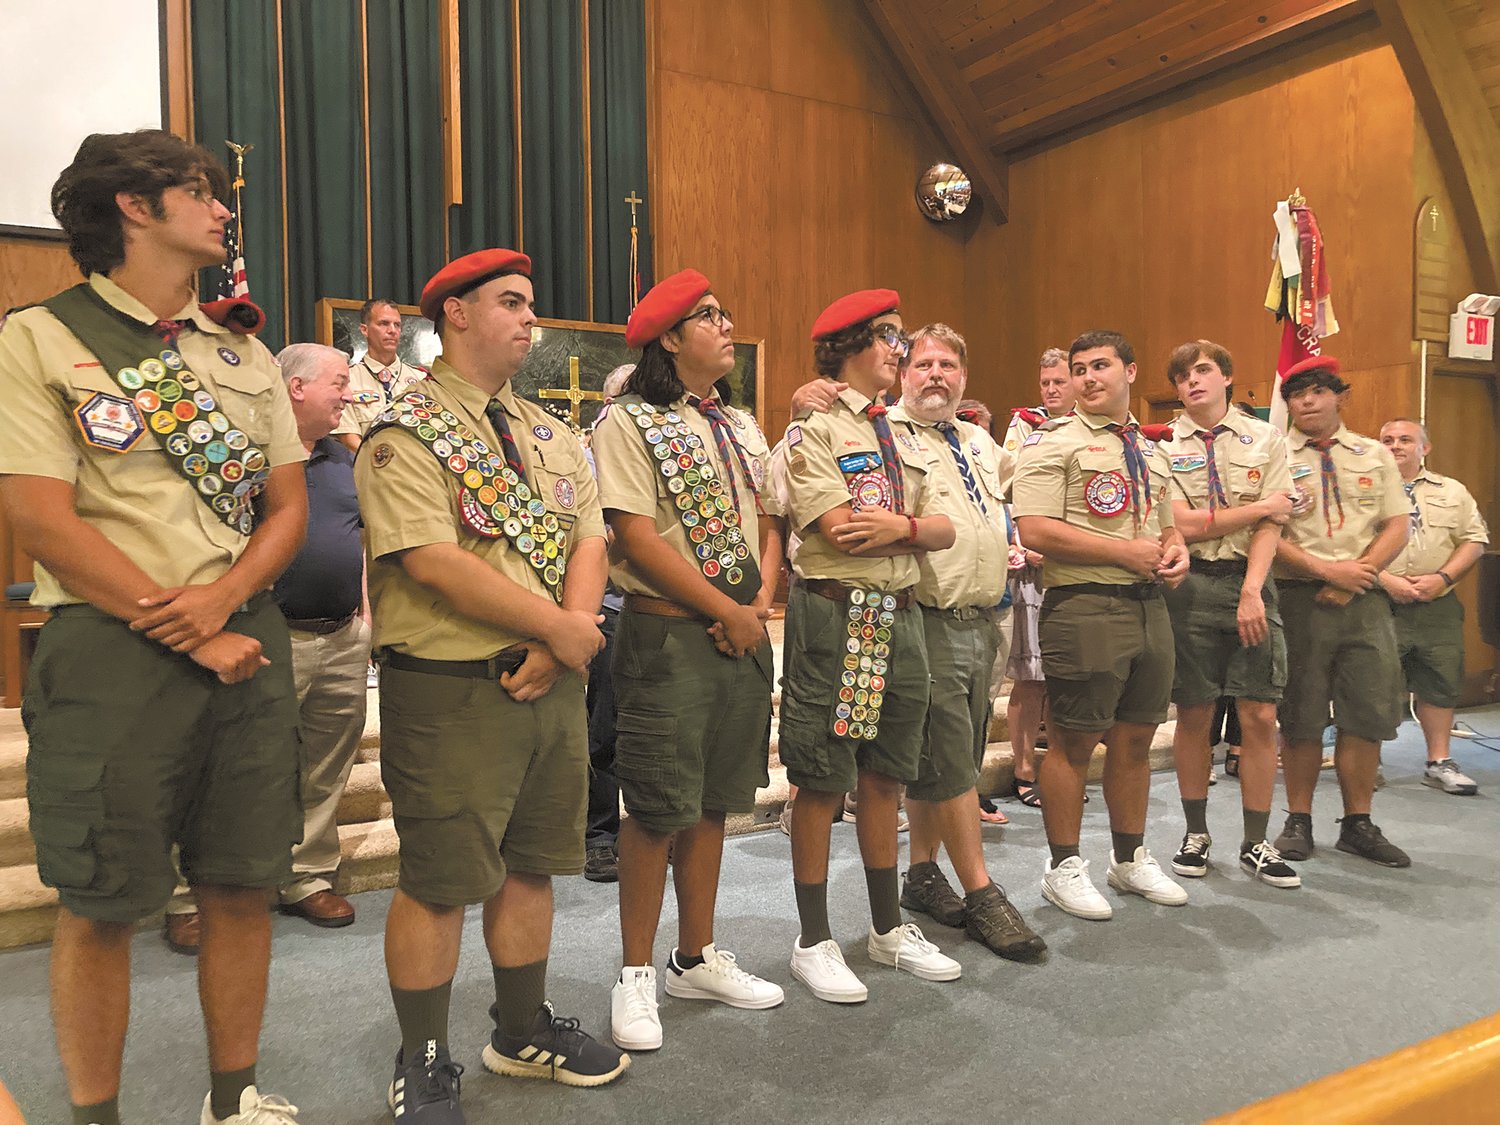 A FEW WORDS FROM THE SCOUT MASTER: Scout master Jeff Goldthwait recalls the growth he has seen from the seven scouts during his time as scout master. From left: Spencer Hill, Stephen Caniglia, Andrew Garcia, Eric Garcia, Jeff Goldthwait, Teddy Shackleford, Nick Cobb and Brian Alviti. (Herald photo)